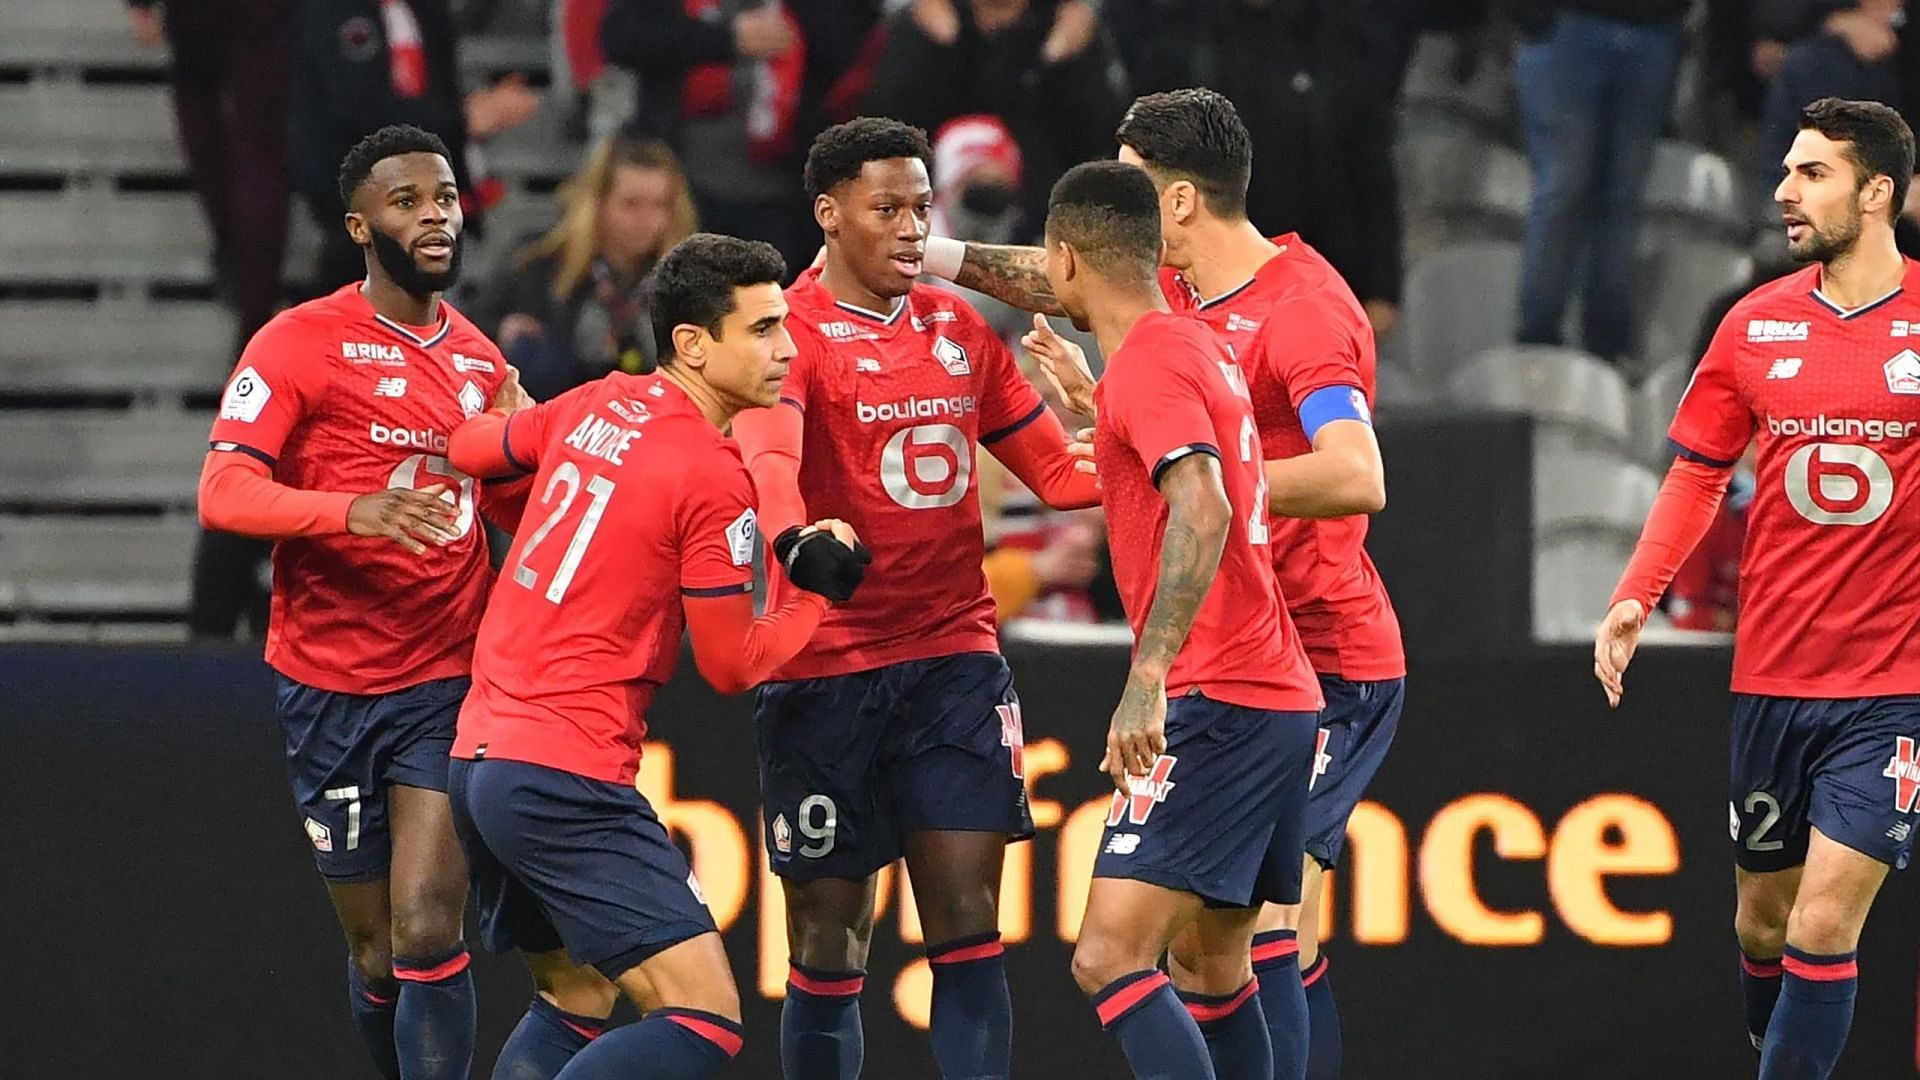 Lille will be hopeful of progressing in the Coupe de France when they take on Auxerre this weekend